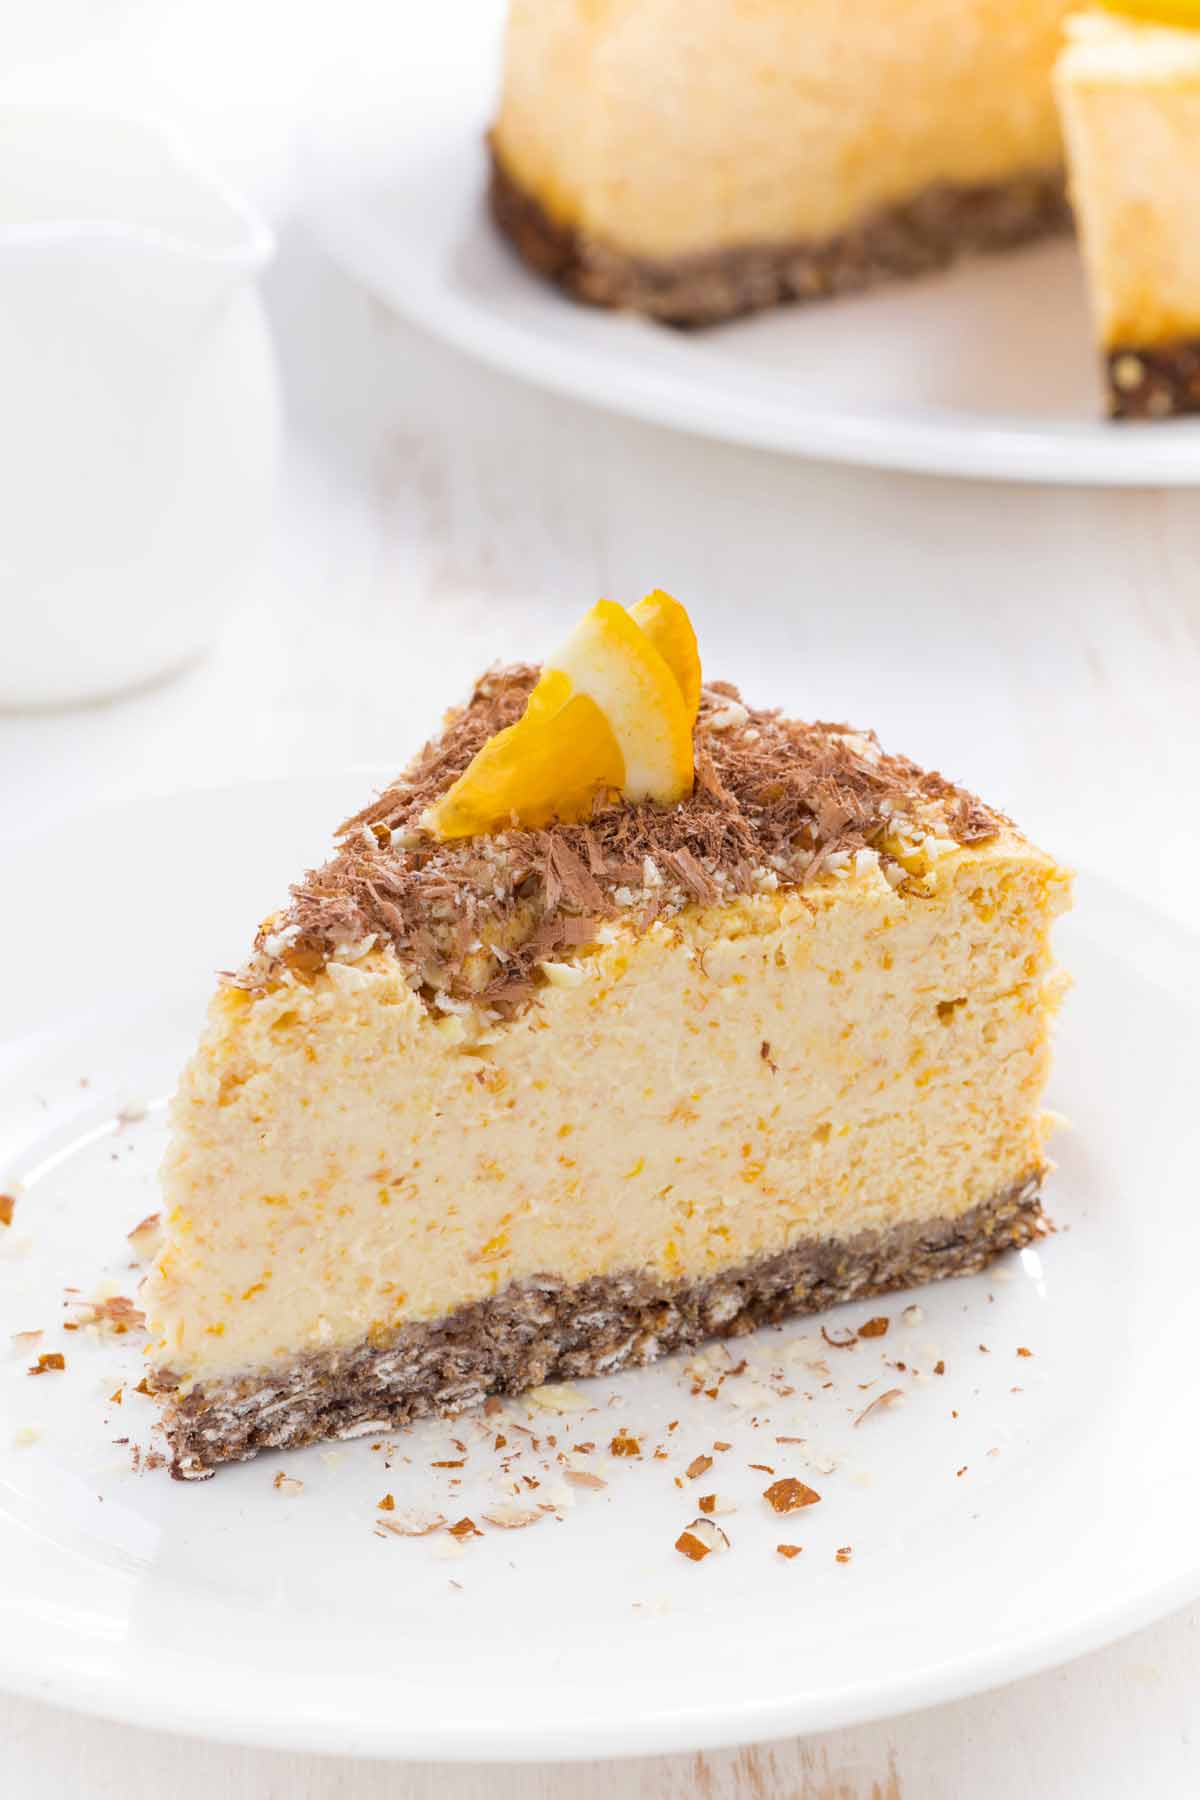 Plate with a slice of orange chocolate cheesecake.